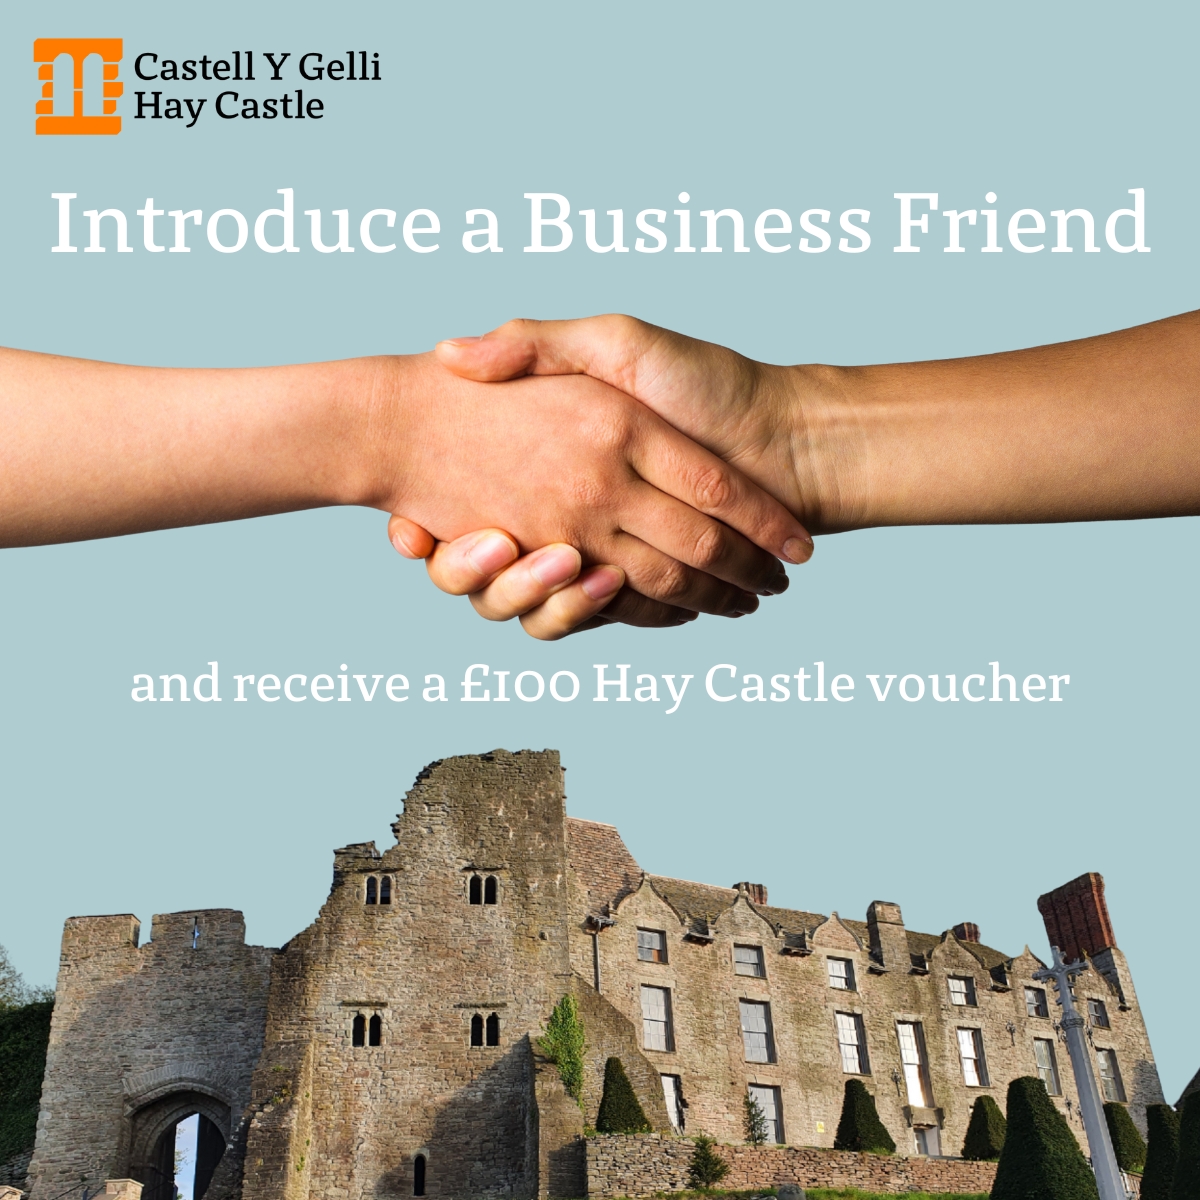 Introduce a Business Friend and receive a £100 Hay Castle voucher. If you would like to introduce a Business Friend then please contact us on info@haycastletrust.org for more info